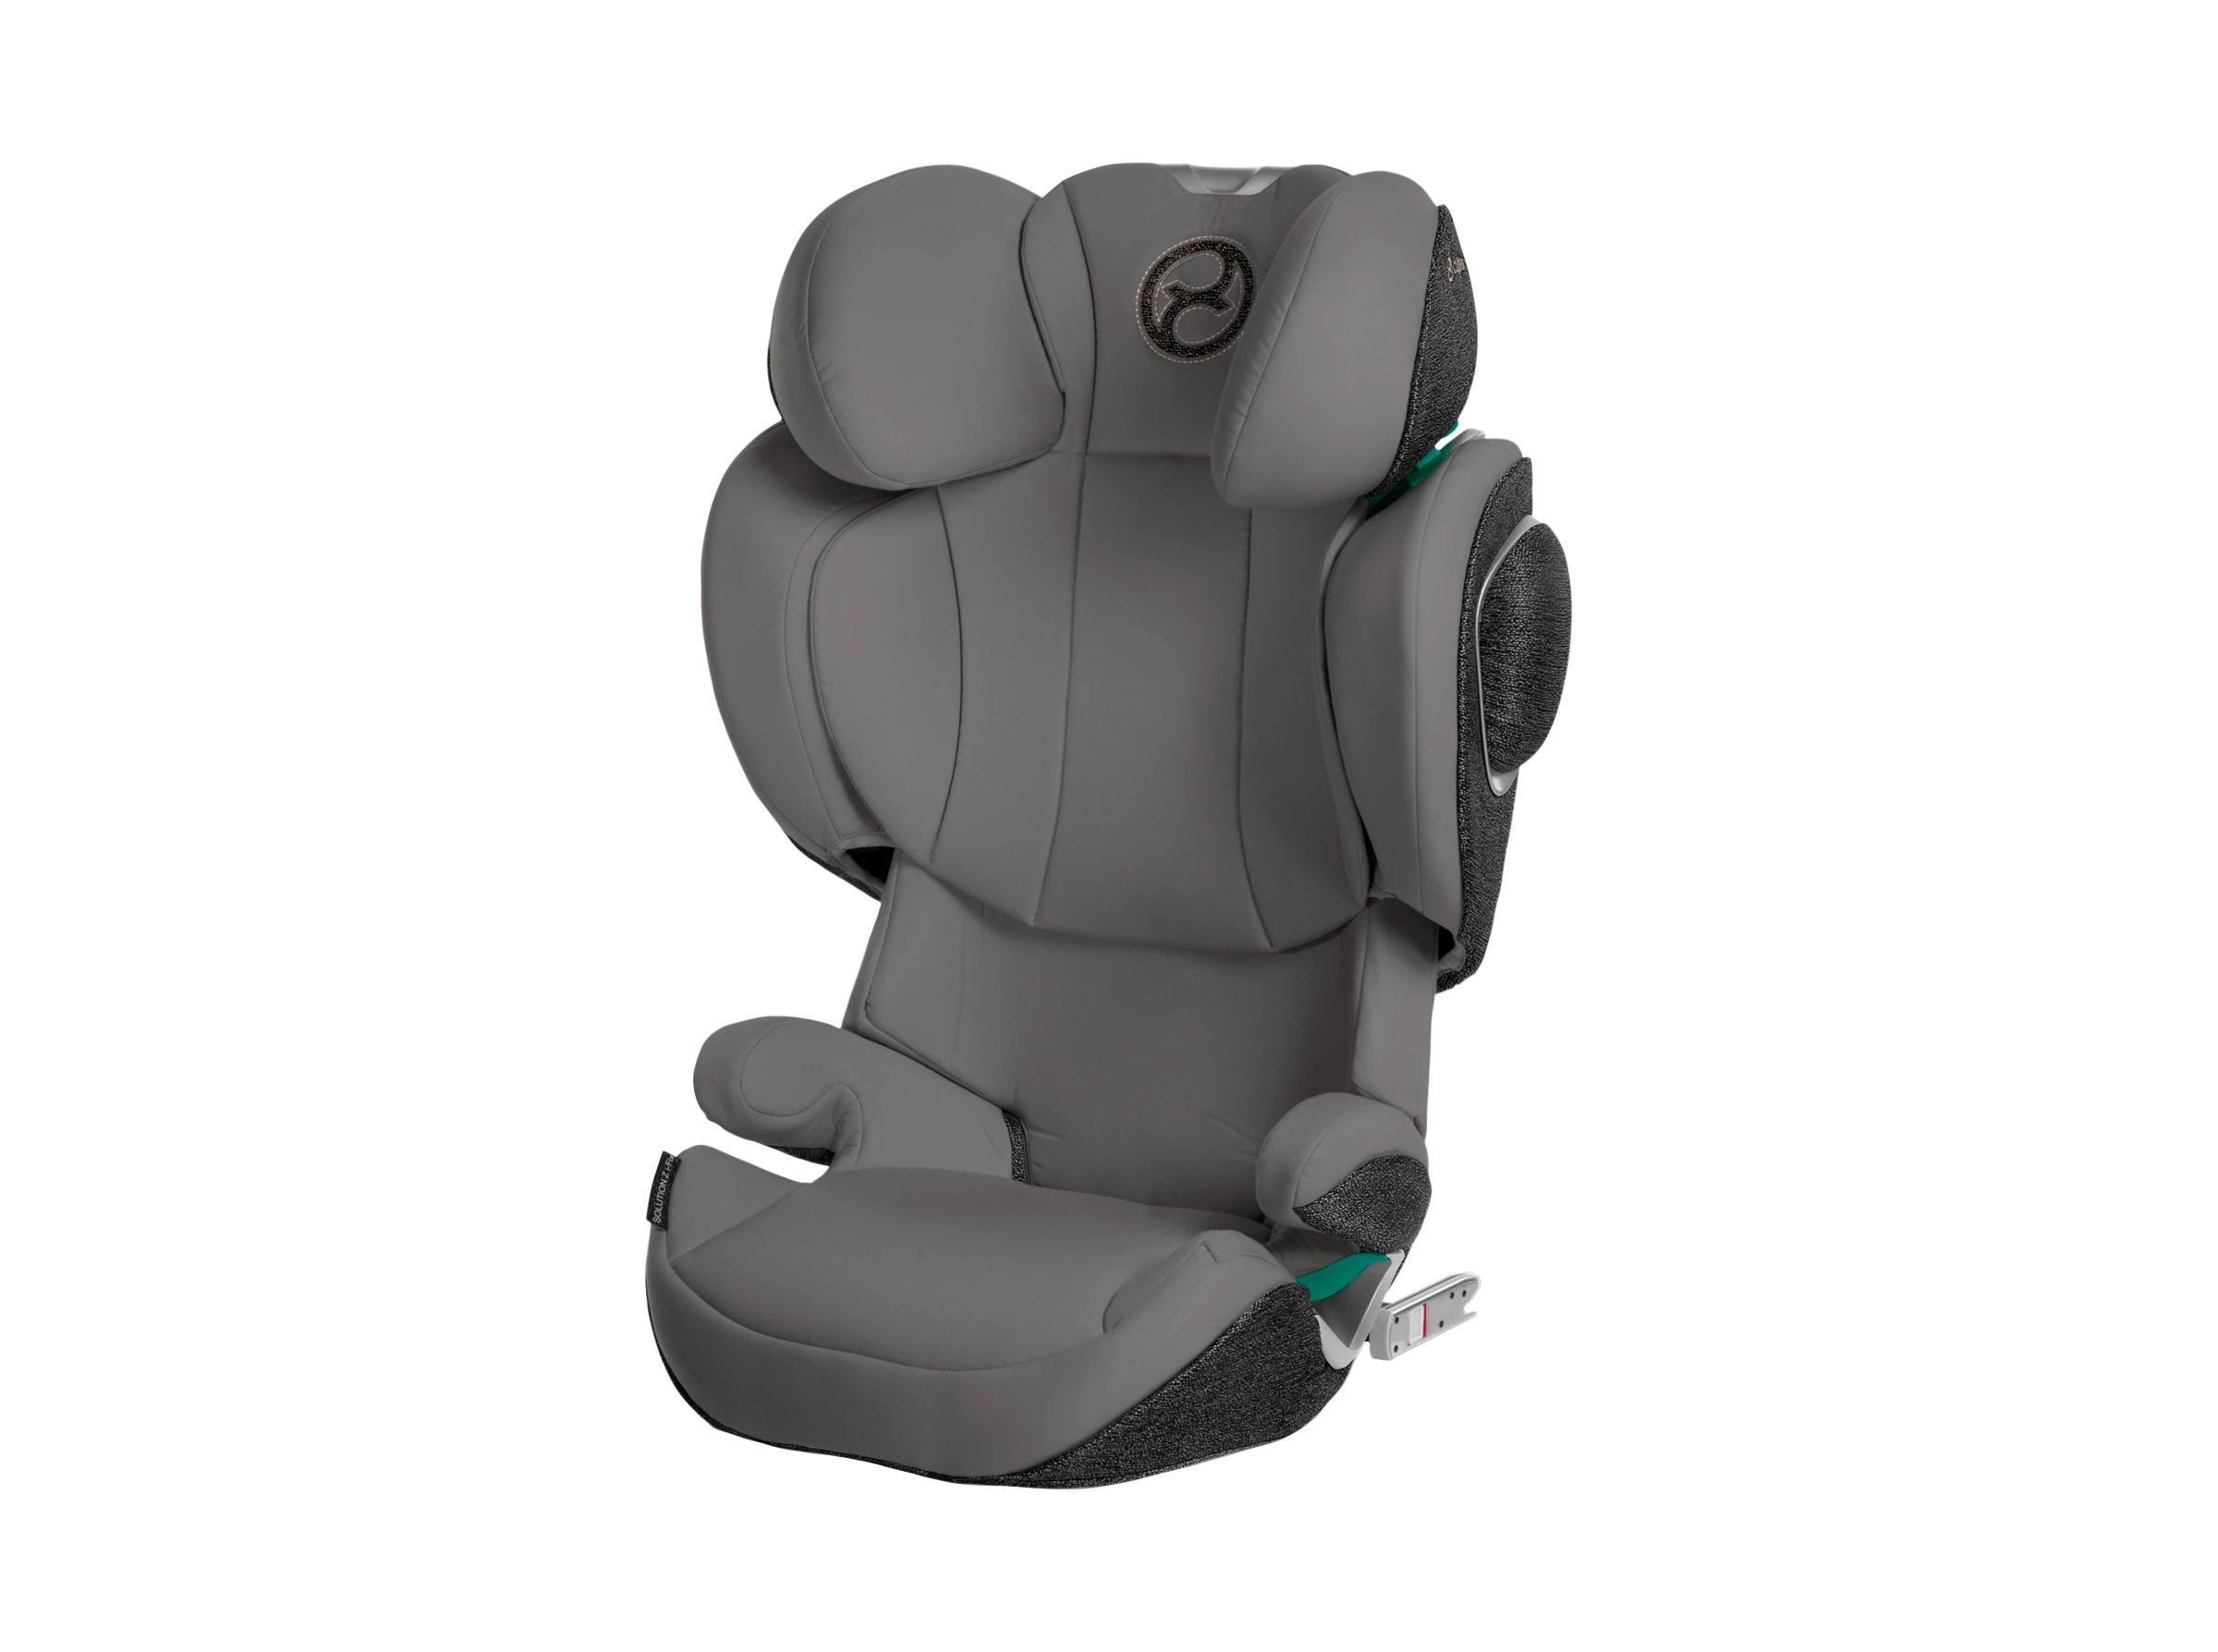 A group 2/3 car seat